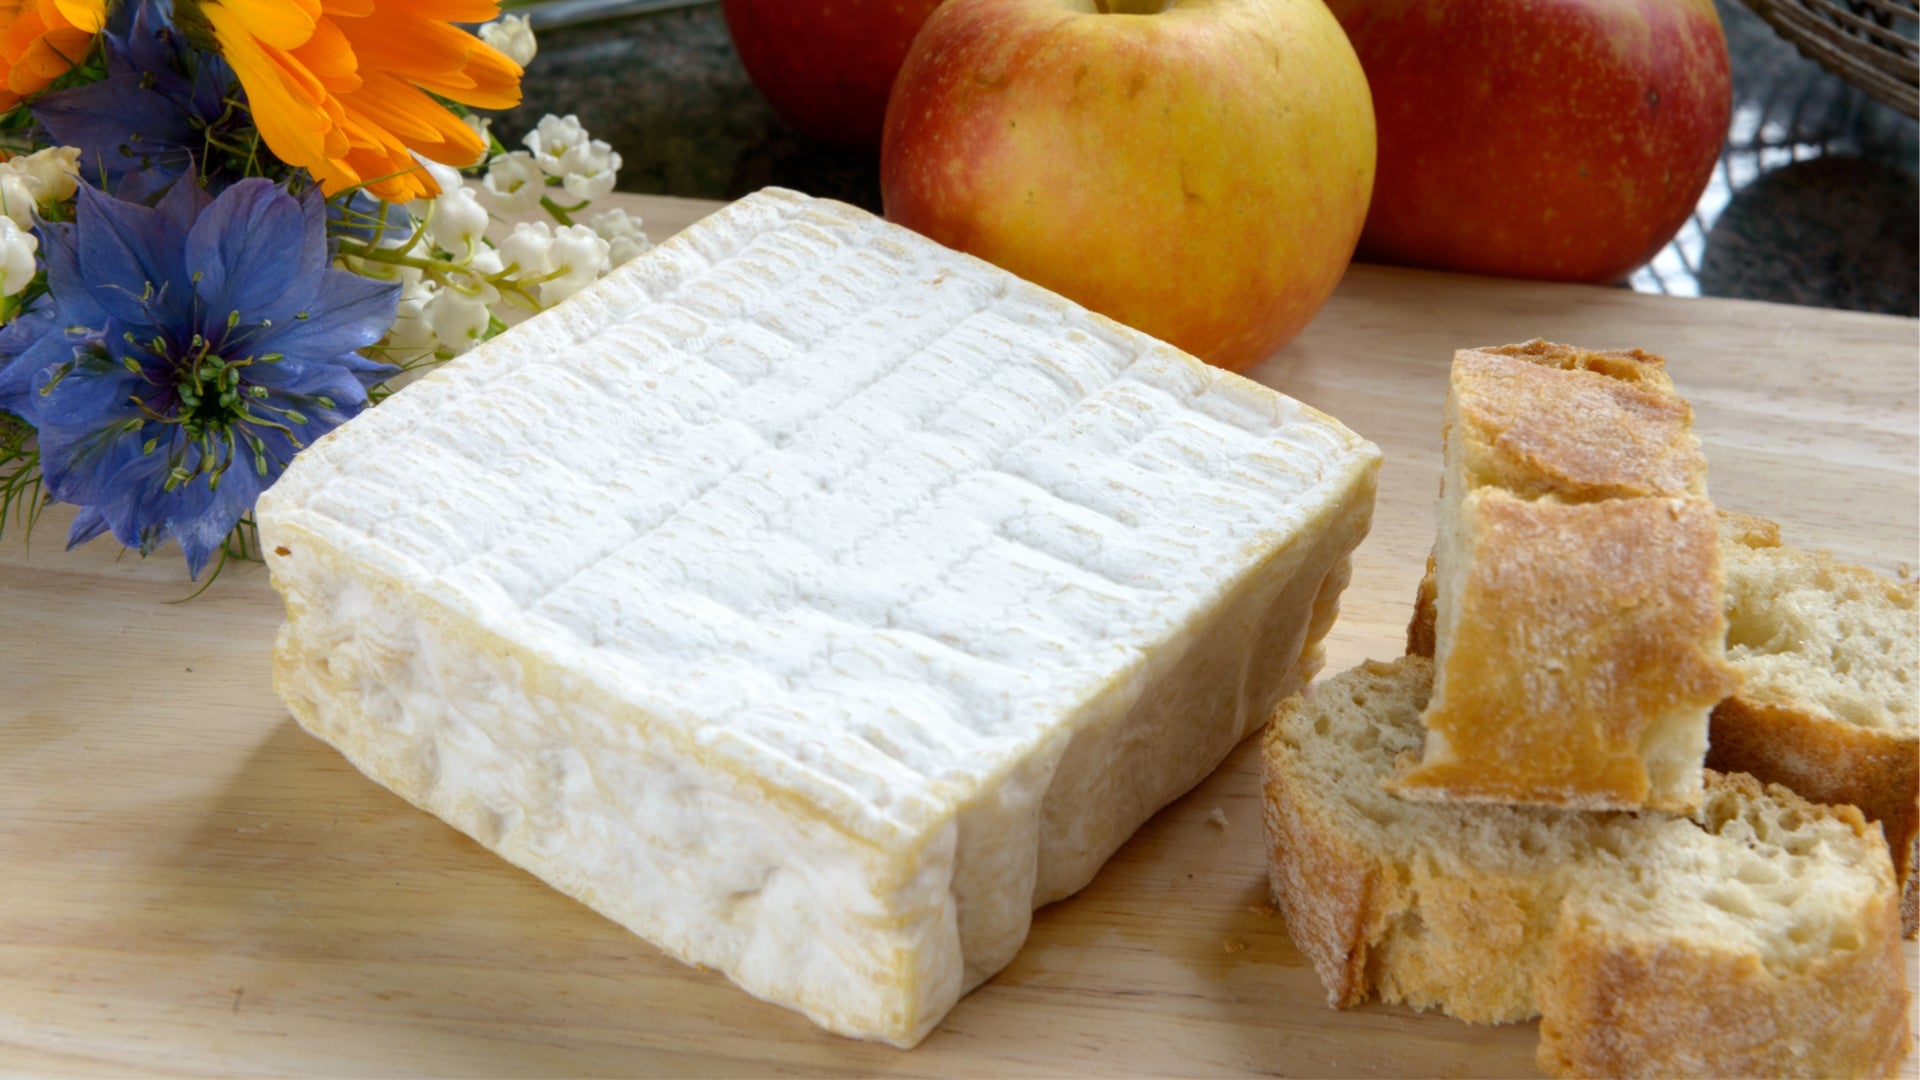 Cheese - Pont l'Eveque 8 oz